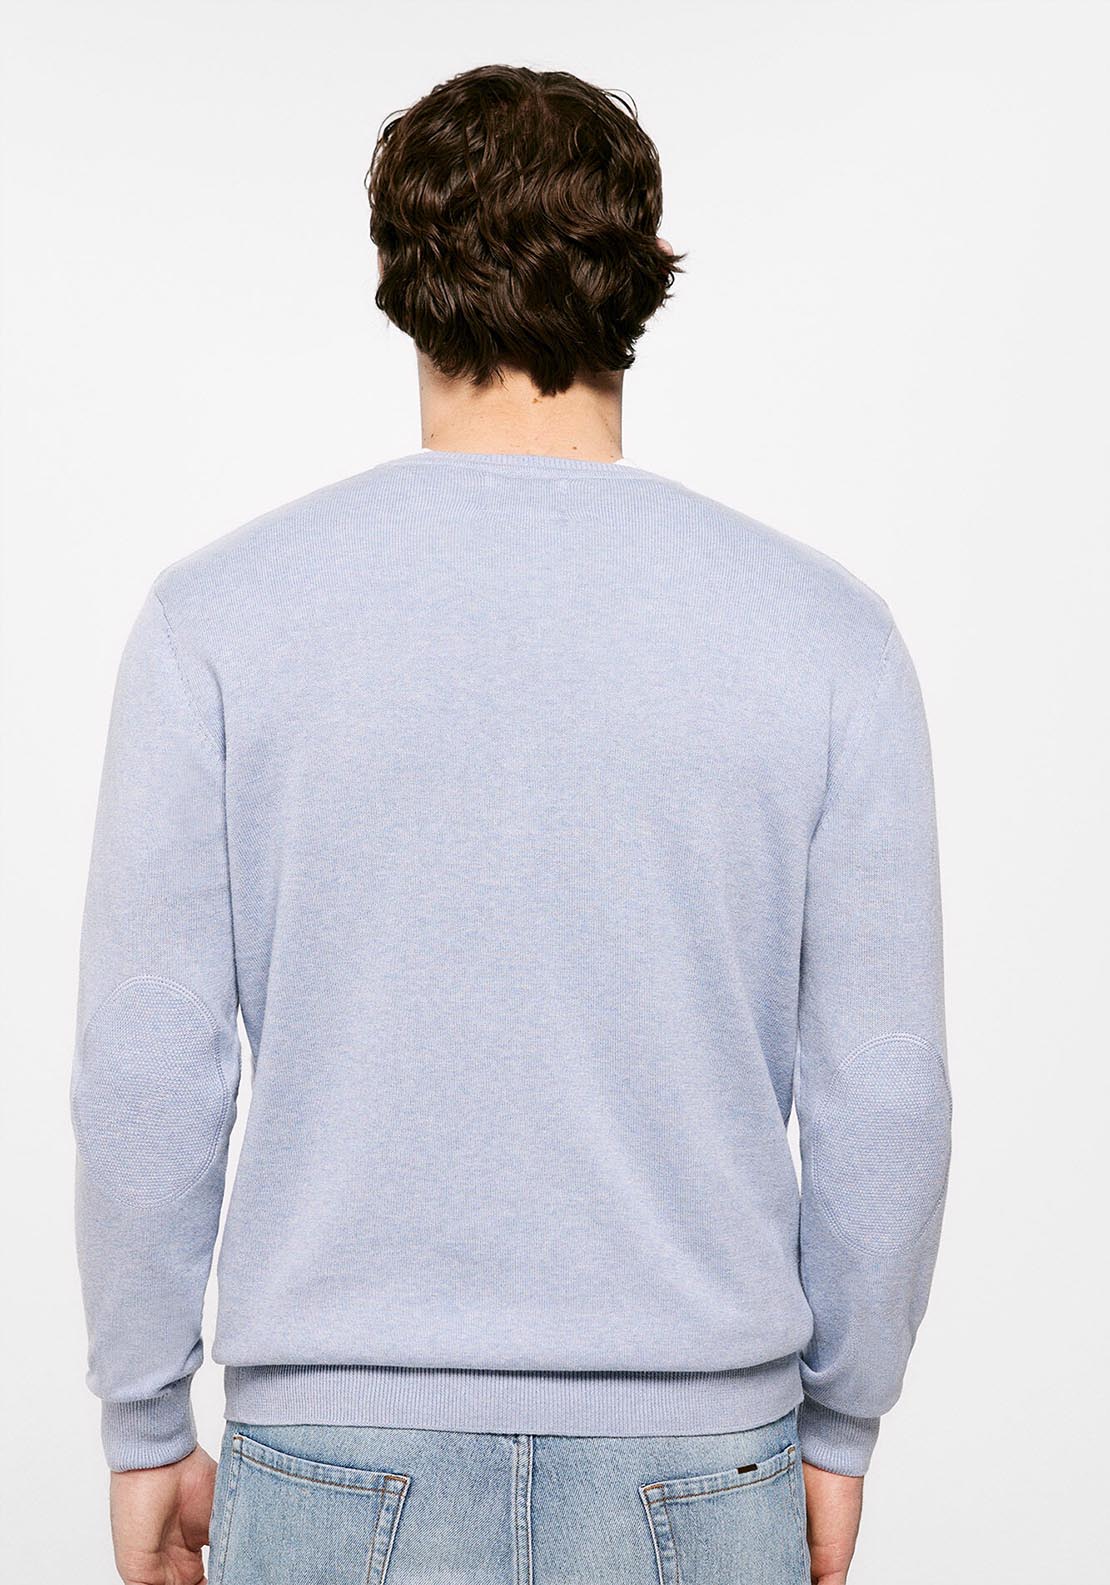 Springfield Essential jumper with elbow patches - Blue 3 Shaws Department Stores